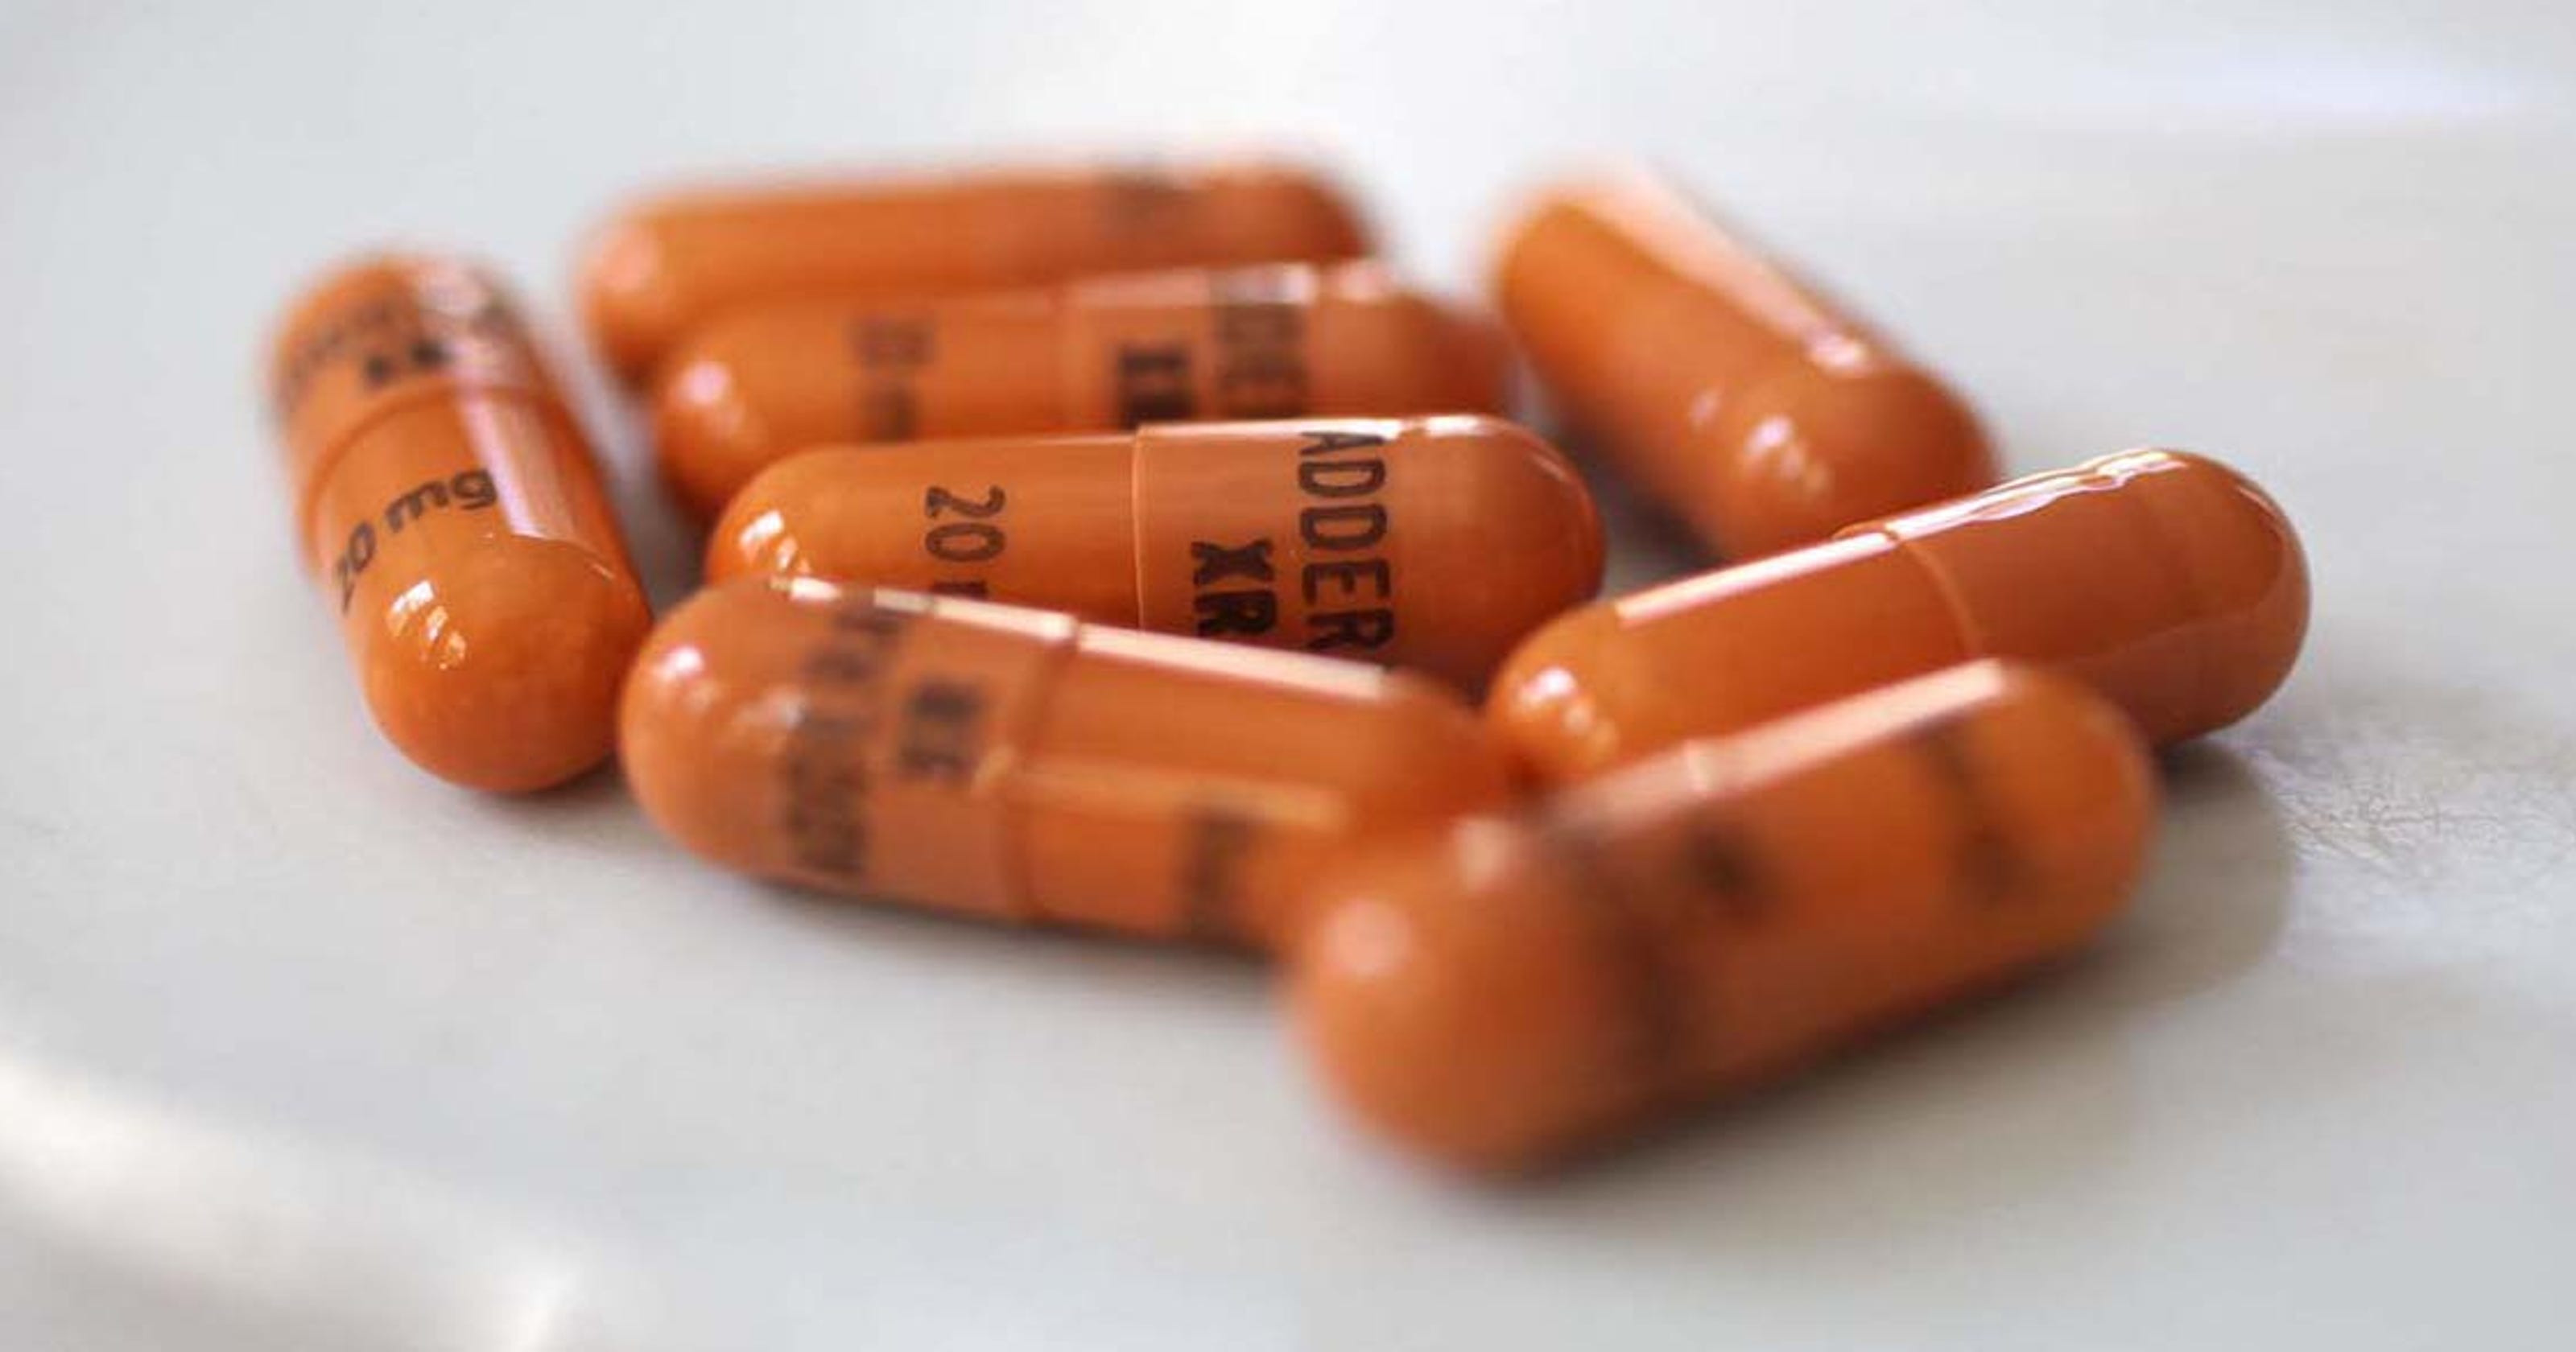 Adderall addiction is real. ‘Smart drugs’ don’t make you smarter.